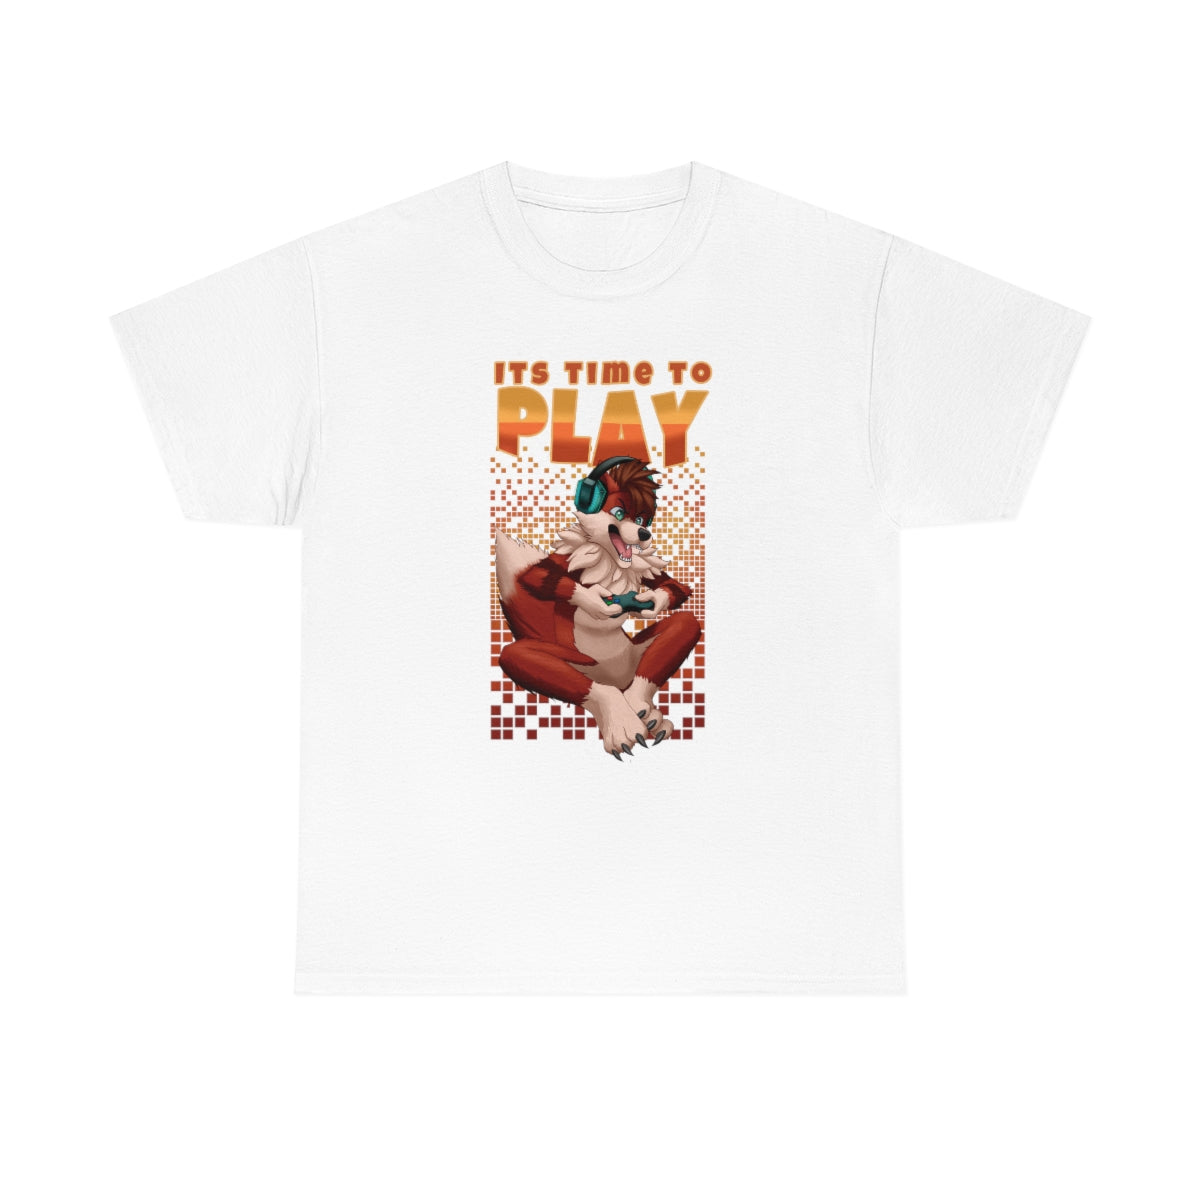 Its Time to Play - T-Shirt T-Shirt Artworktee White S 